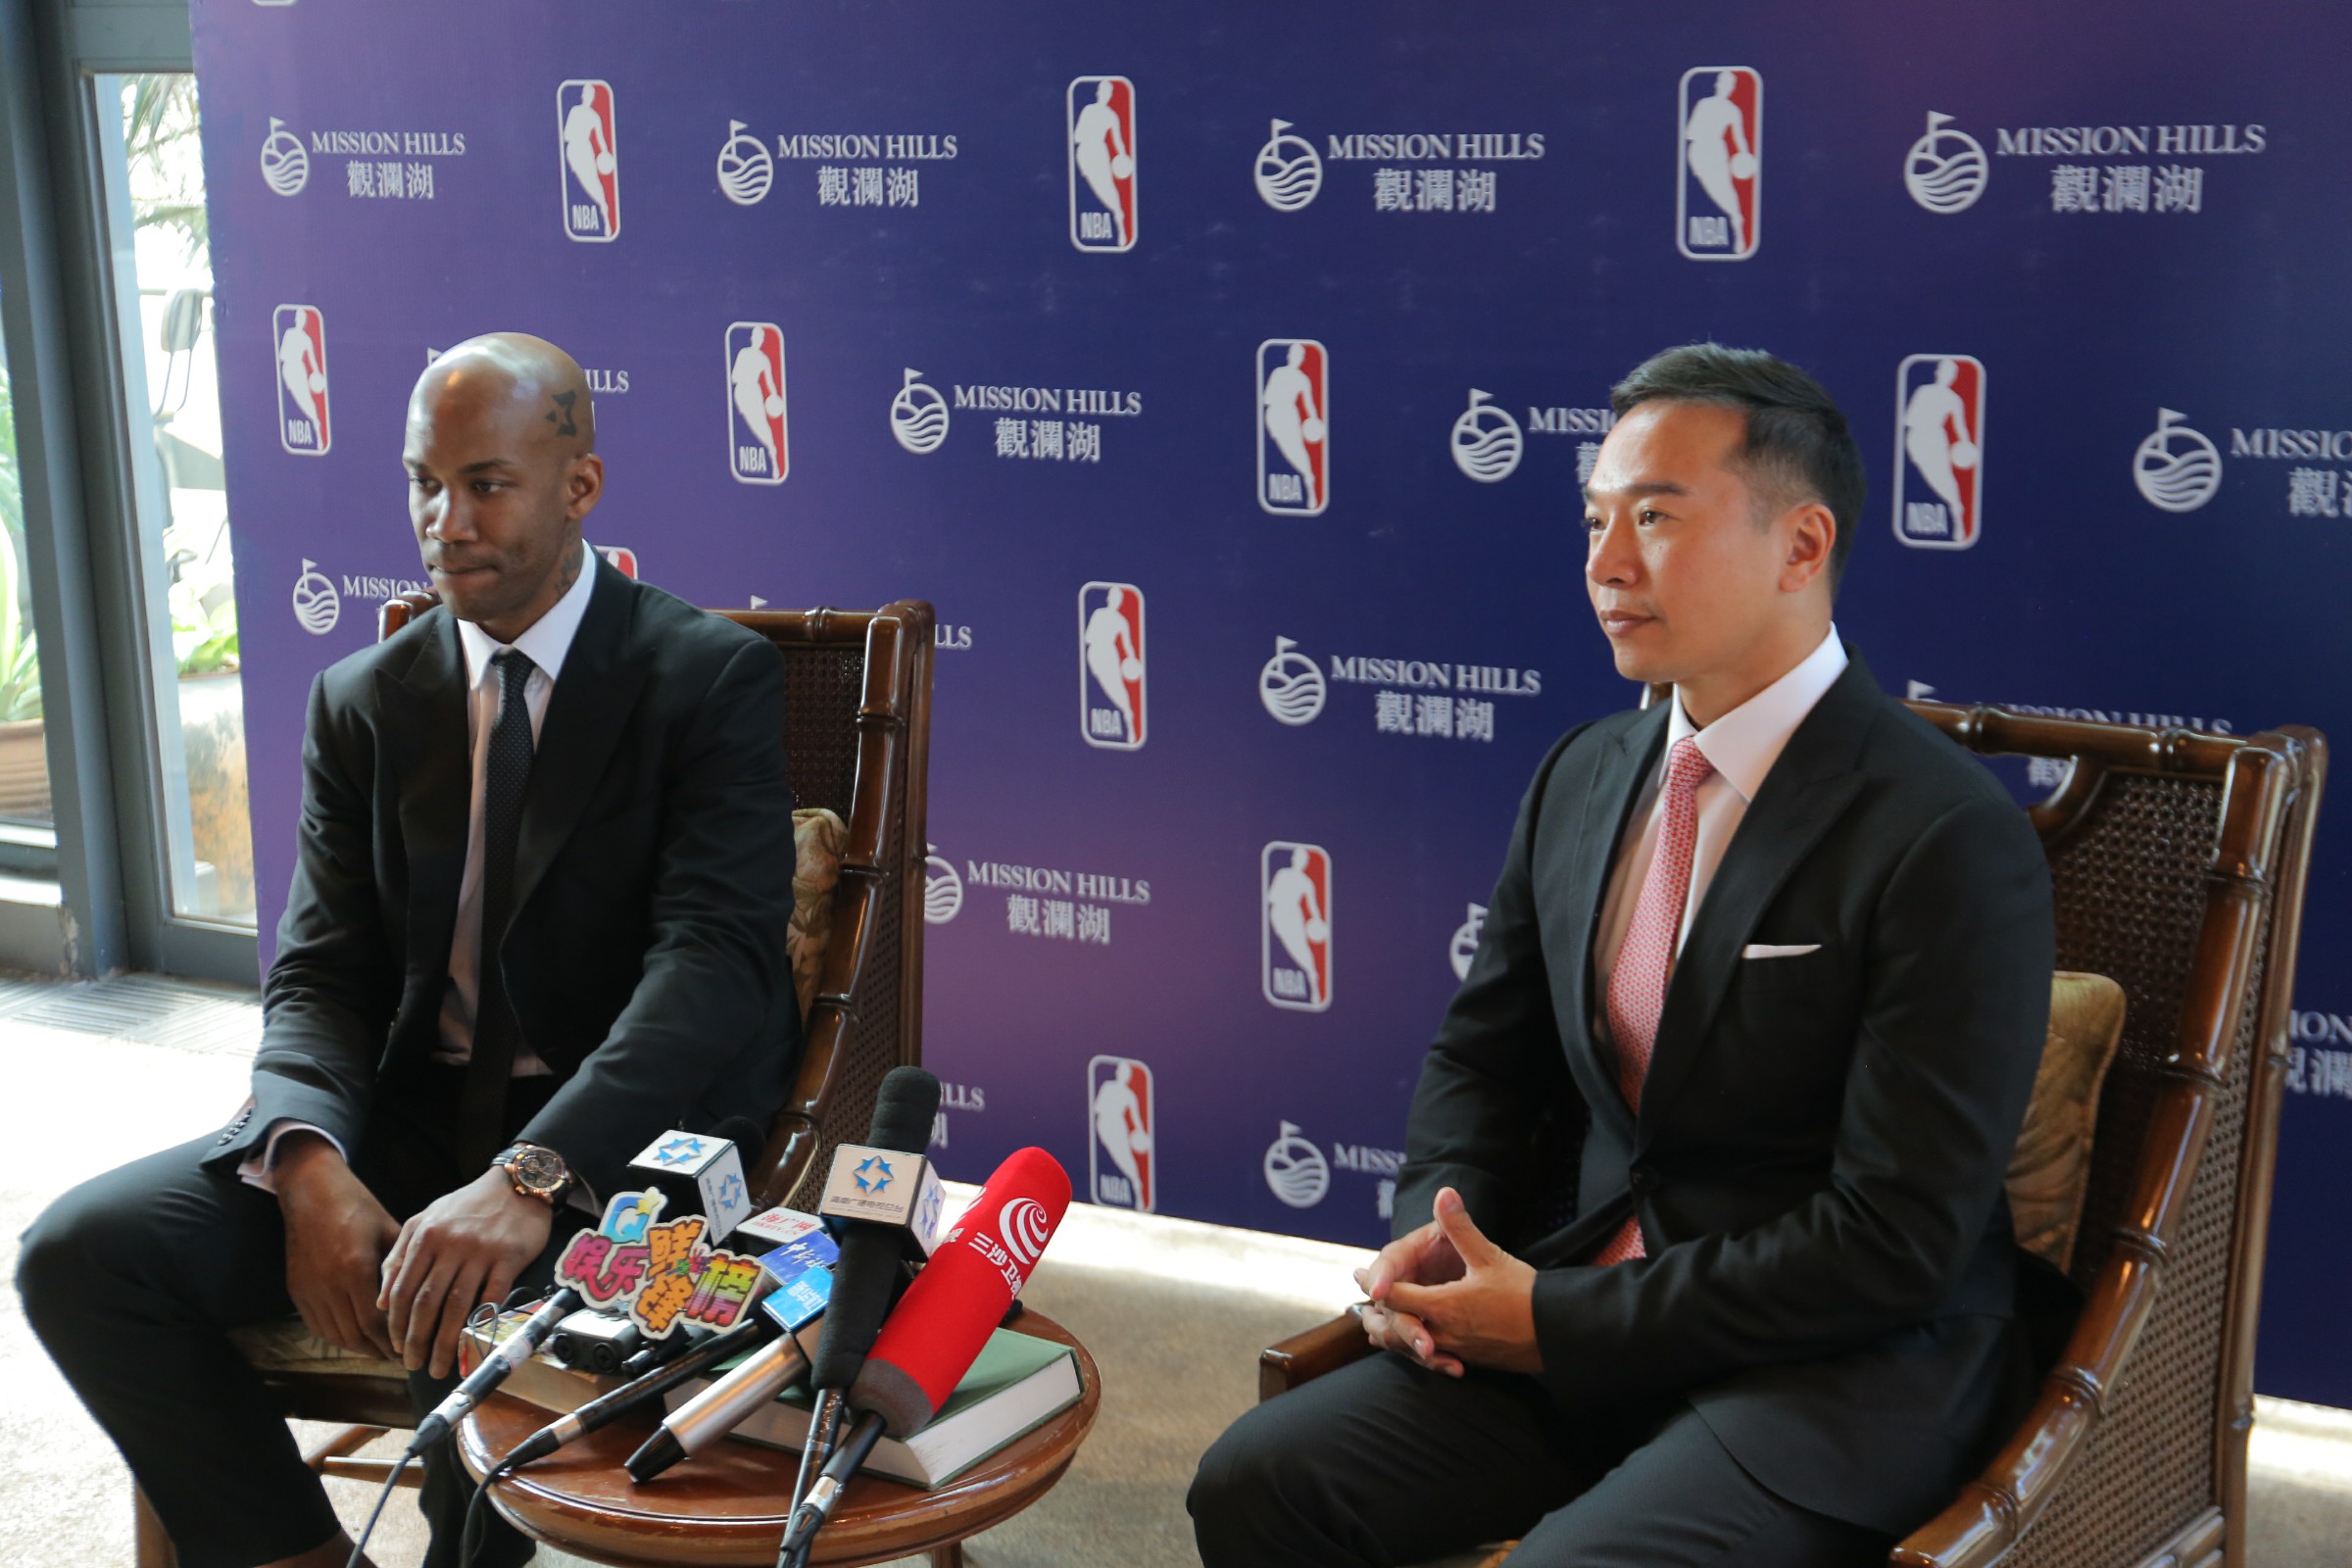 Photo 5 – Stephon Marbury and Tenniel Chu, Group Vice Chairman, Mission Hills Group answer questions from the media at the official opening of the NBA Exhibit at Mission Hills Haikou in Hainan, China